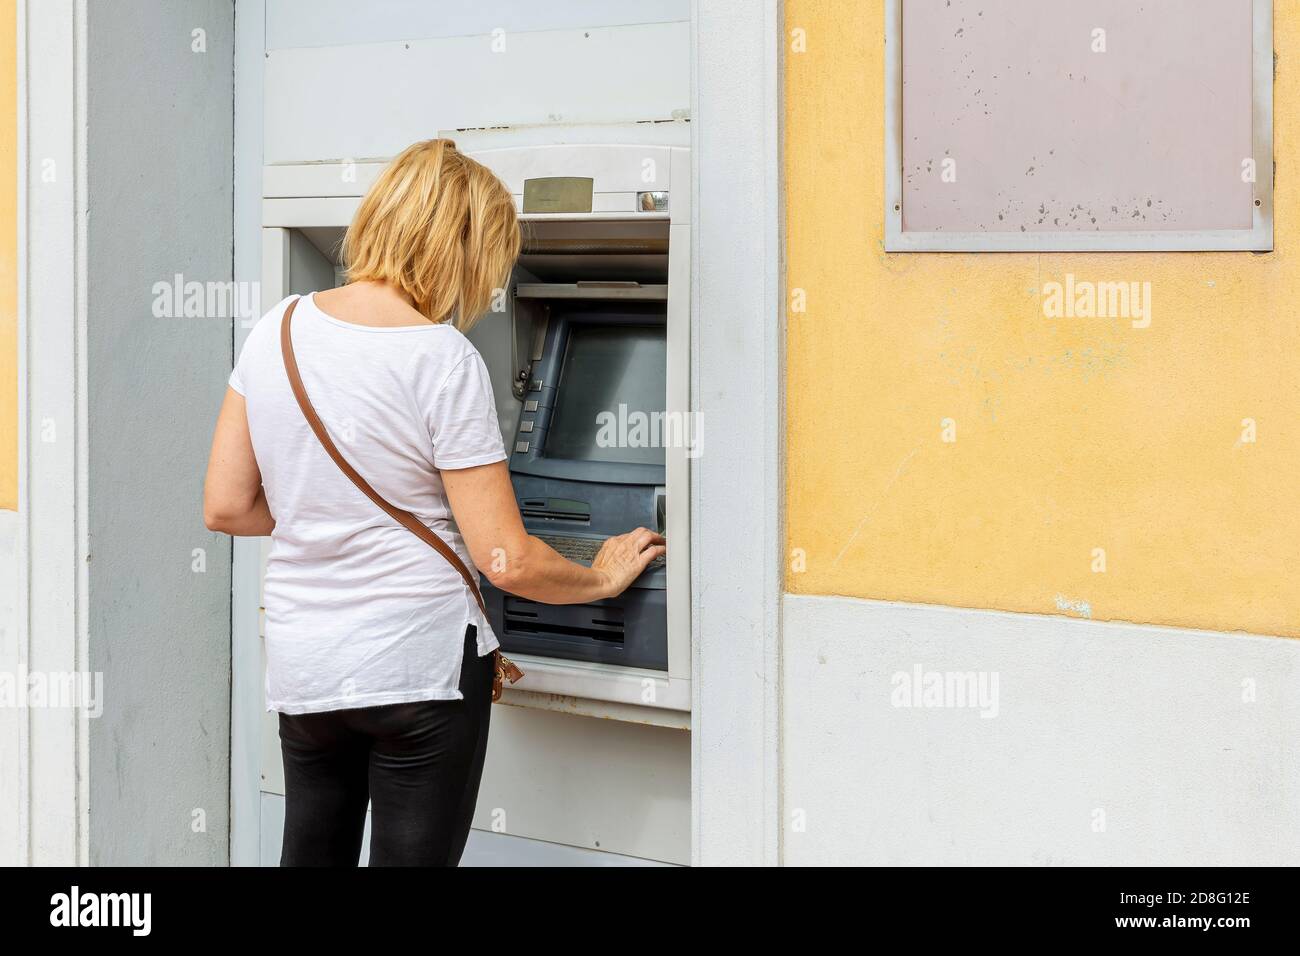 Blond white woman withdraws cash from an ATM Stock Photo